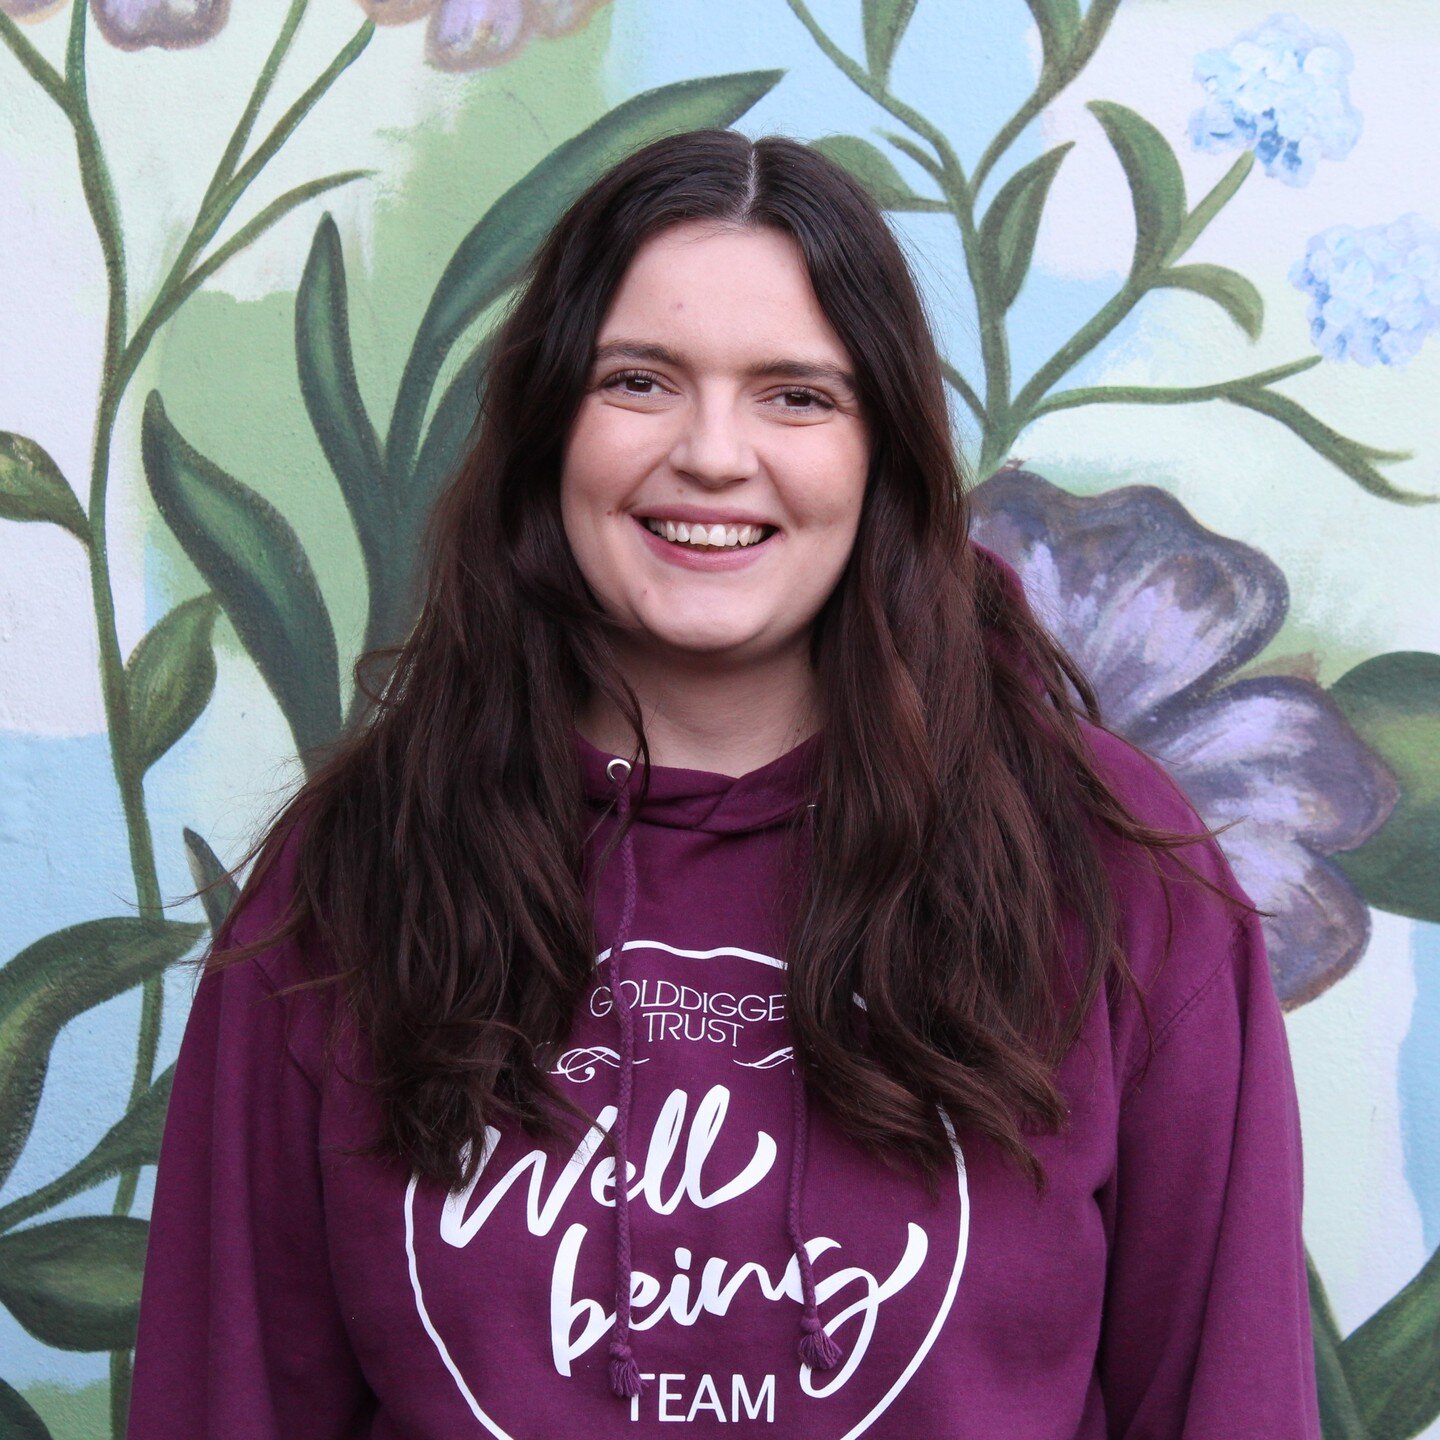 We've welcomed in the New Year with a new member of the team! 

Meet Ella, our new Head of Community!

Having lived in Sheffield all her life, Ella actually watched Golddigger Trust and took part in a school course when she was younger!

Bringing her